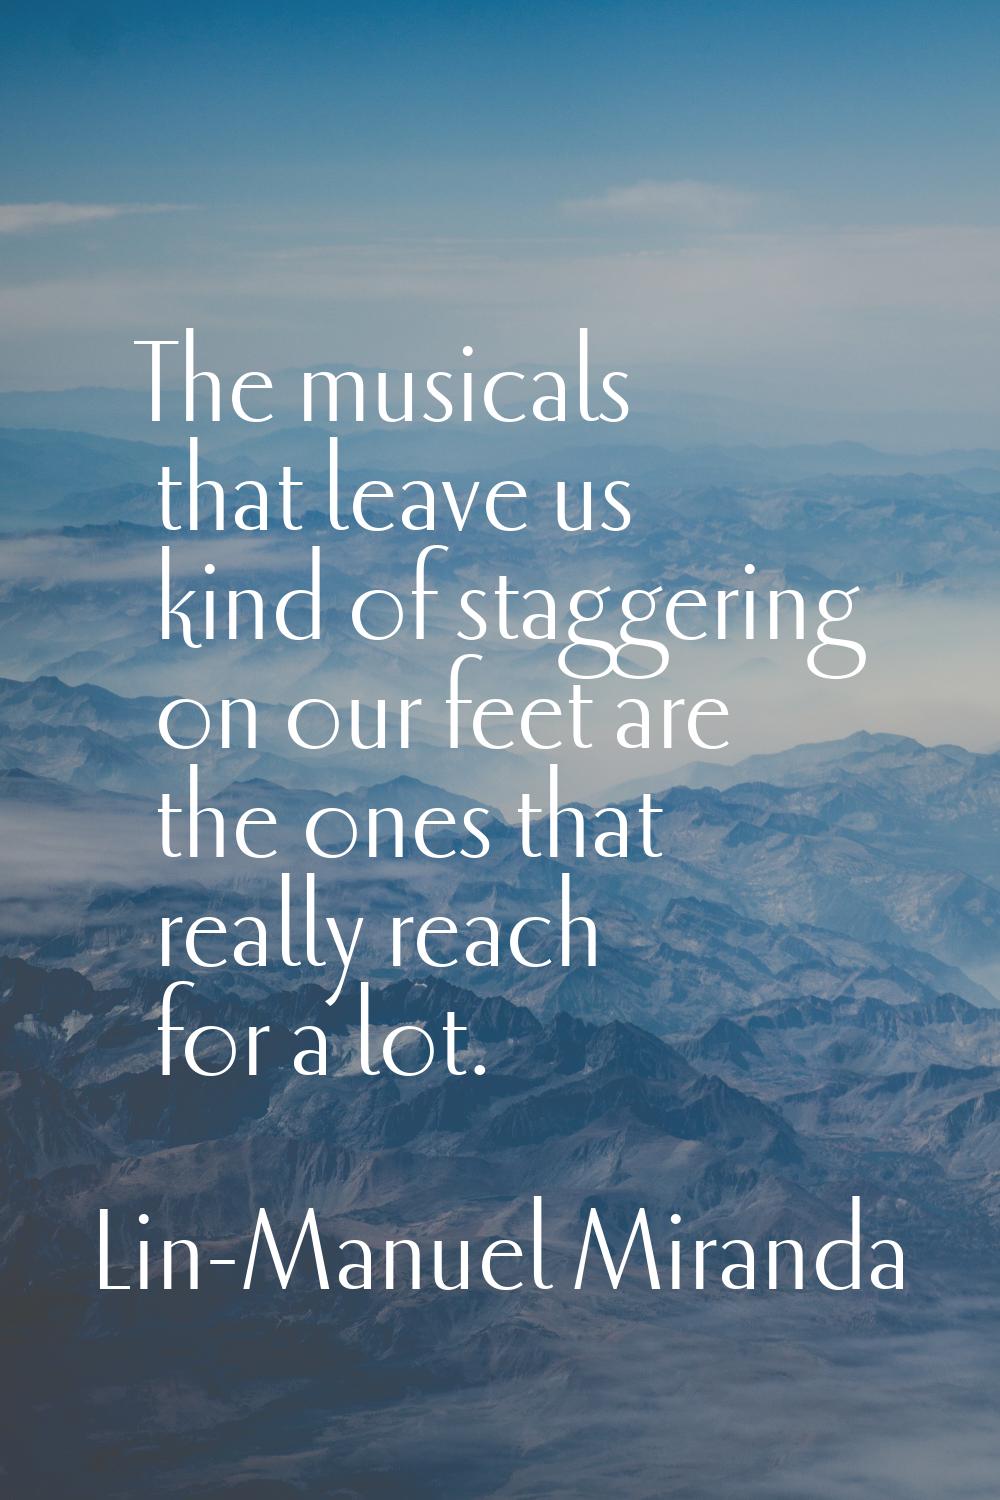 The musicals that leave us kind of staggering on our feet are the ones that really reach for a lot.